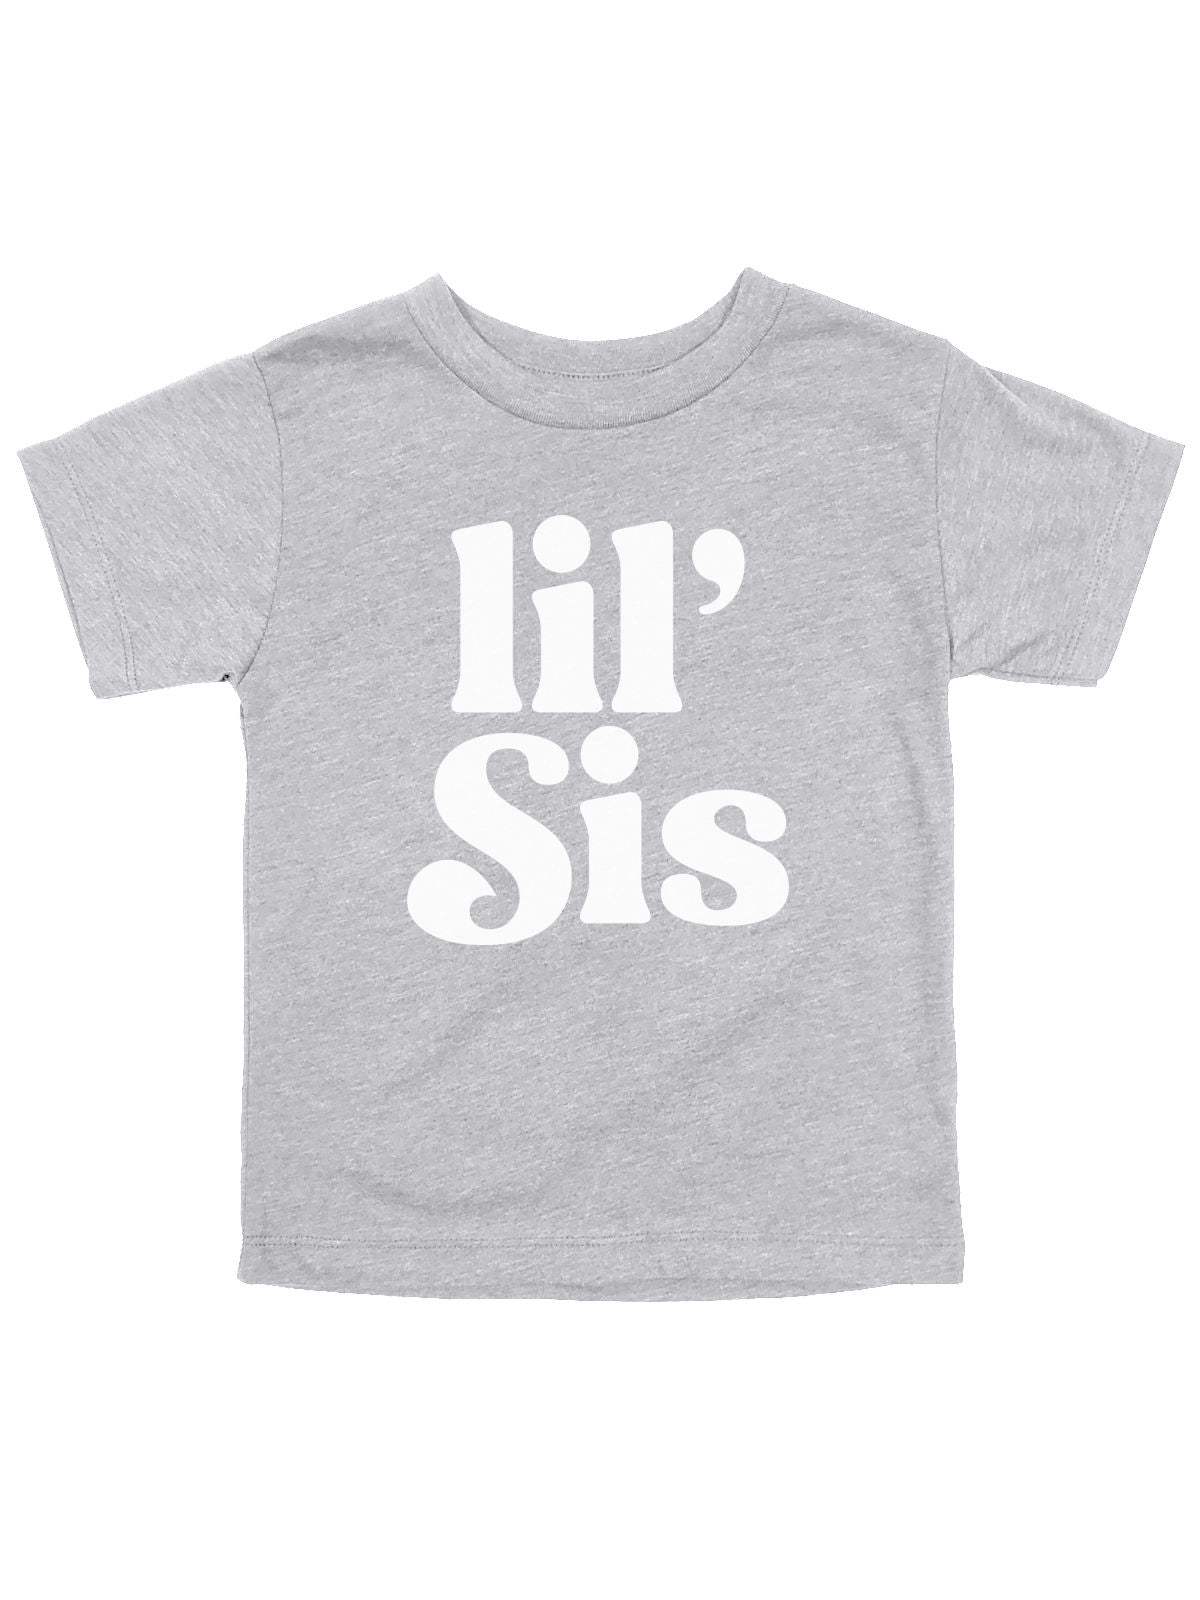 Lil Sis Baby Girl Infant Shirt in Heather Gray